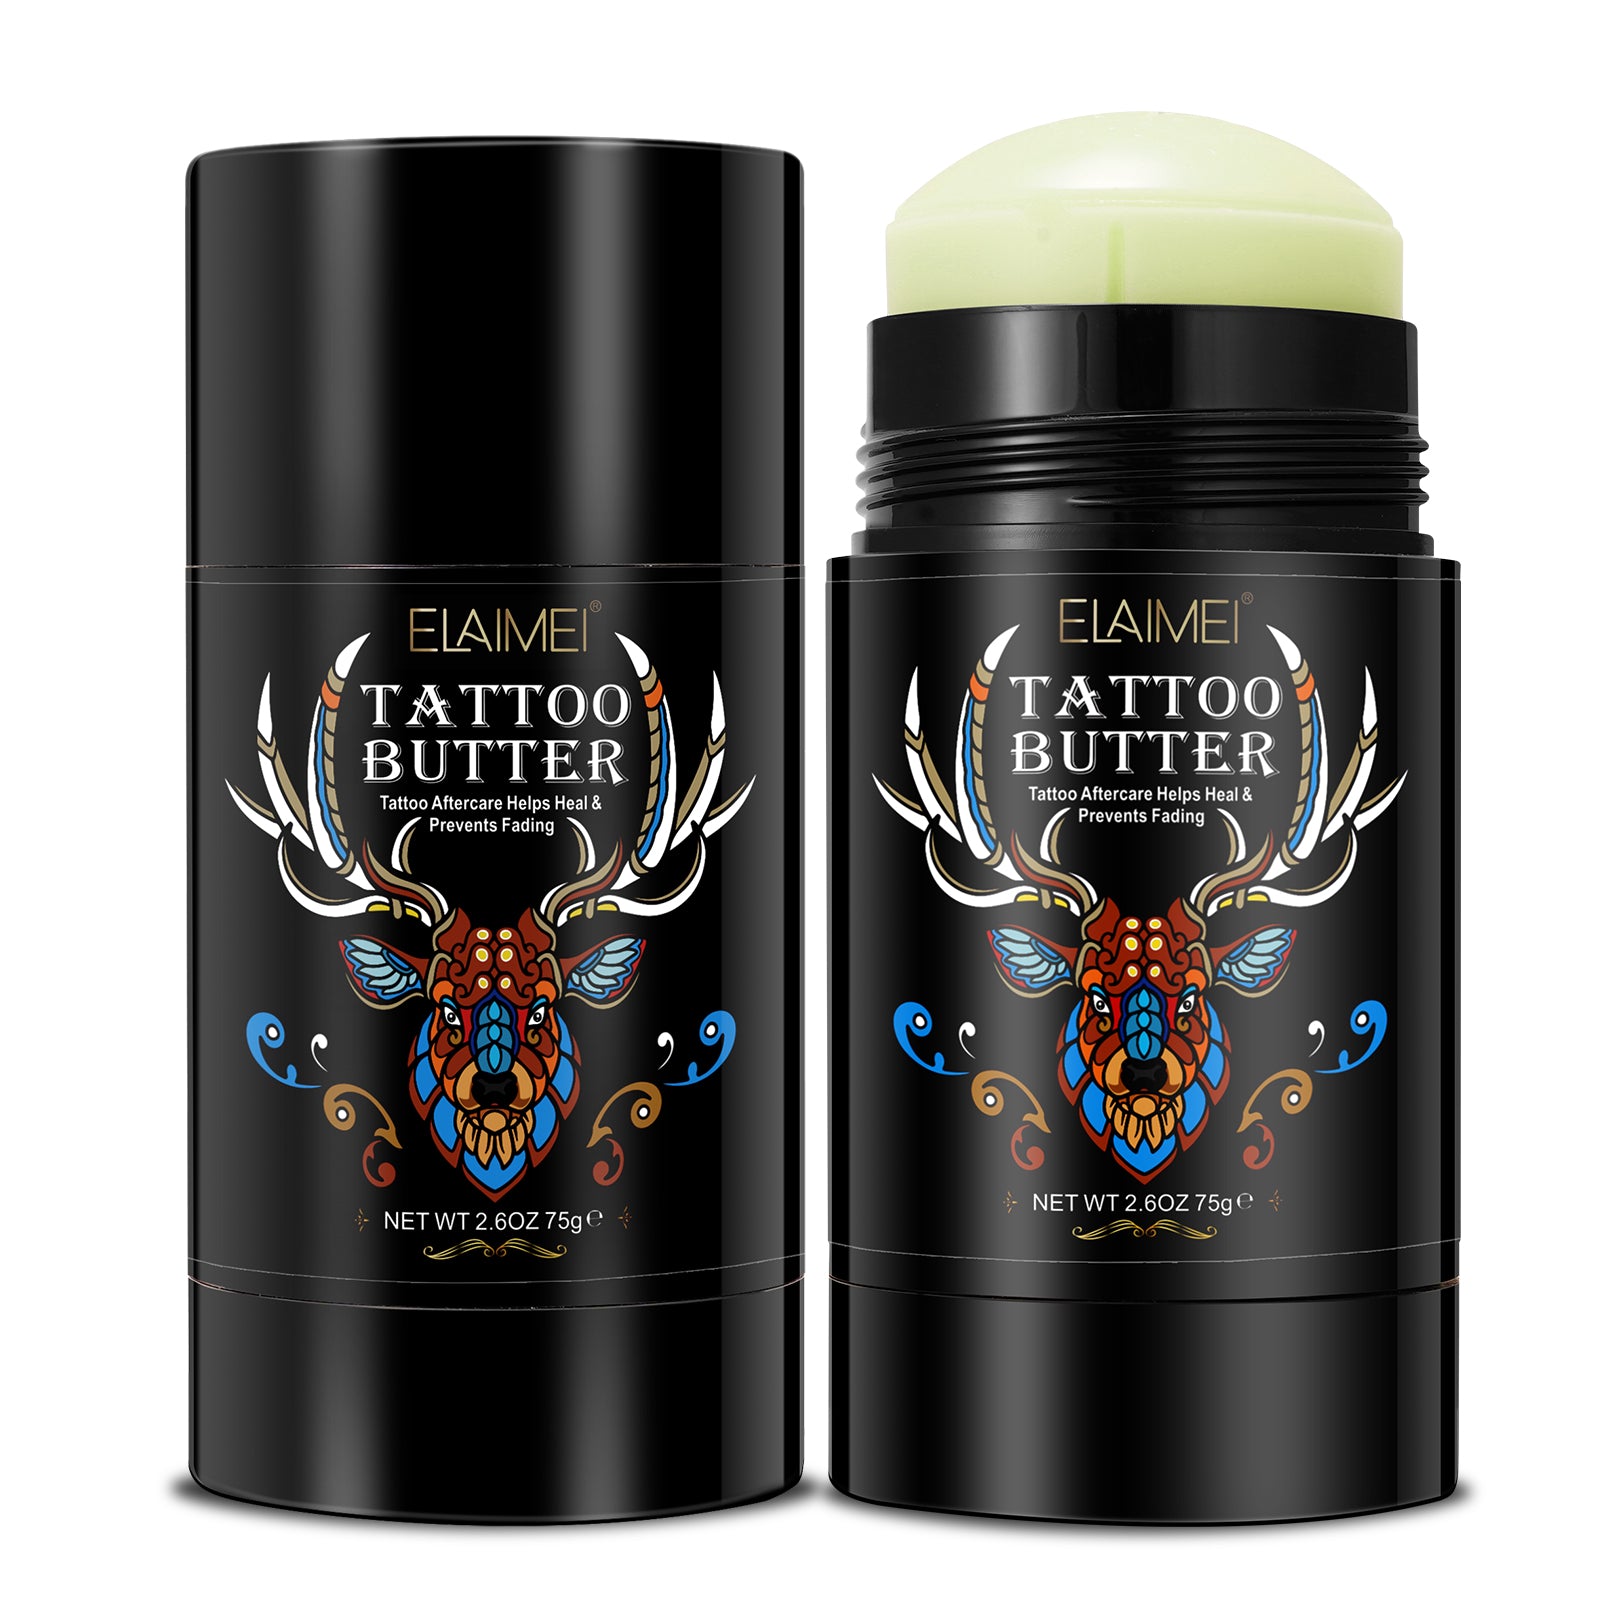 Amazon.com: Tattoo Balm Aftercare, Tattoo Butter Cream Moisturizer Healing  Brightener for Color Enhancing Natural Prevents Old & New Tattoo Color  Fading Protects Skin : Beauty & Personal Care